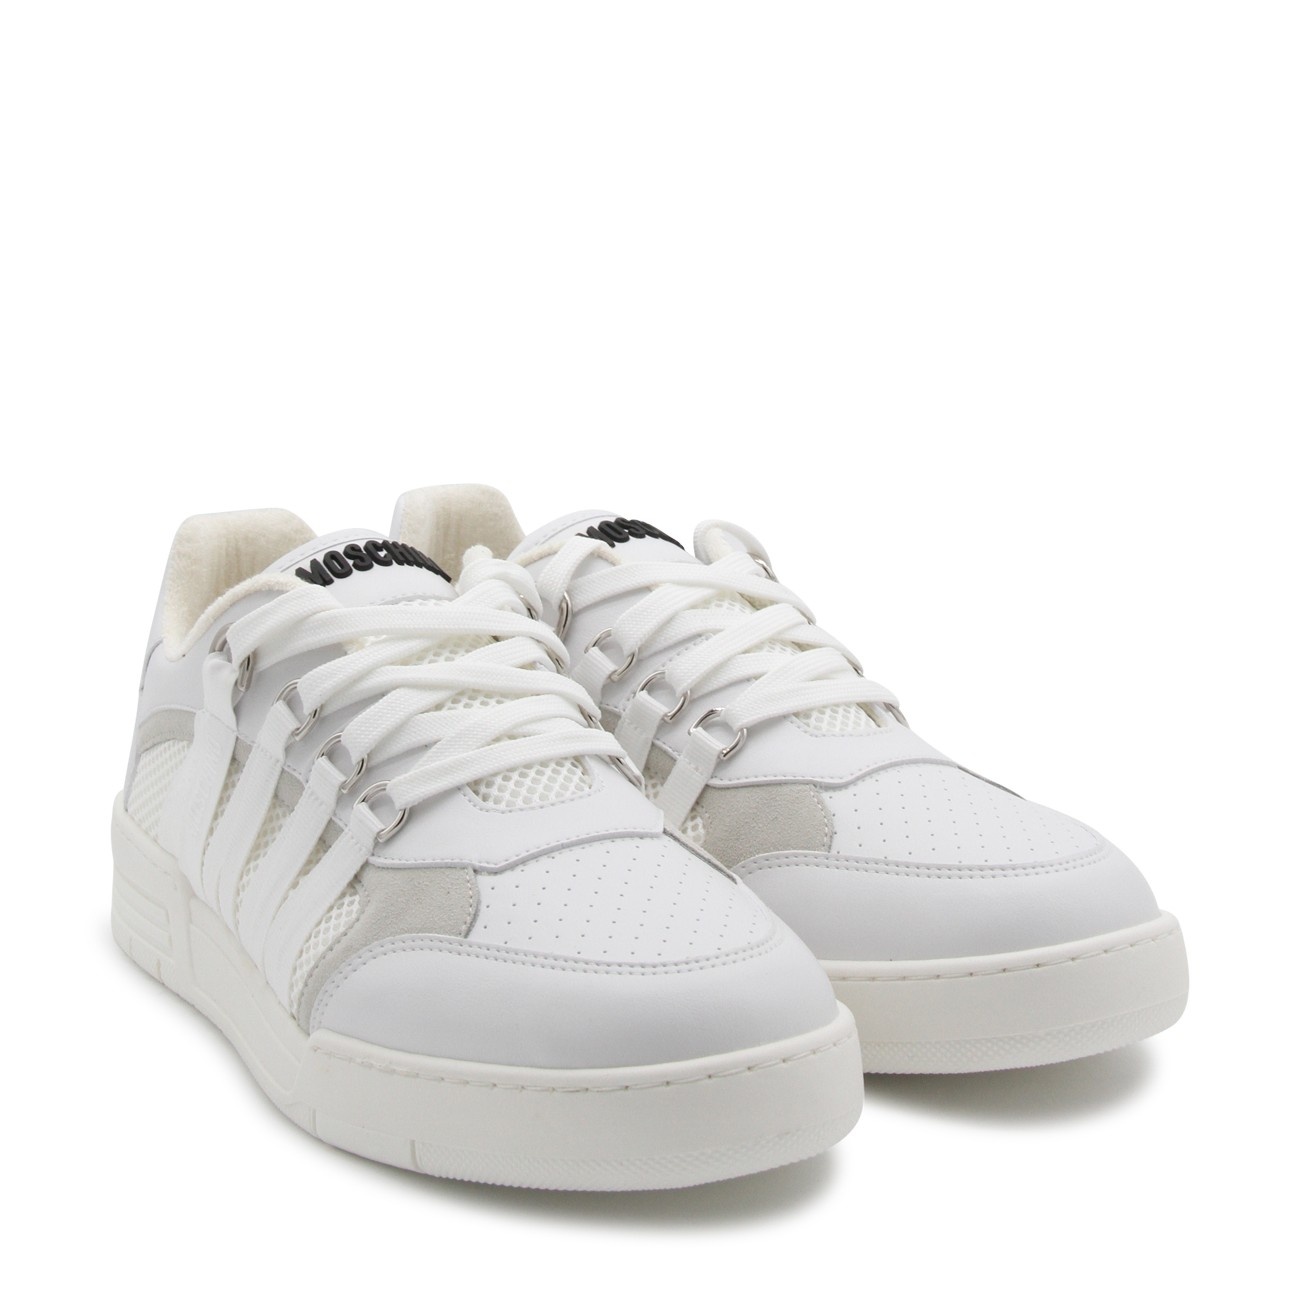 white leather sneakers - 2